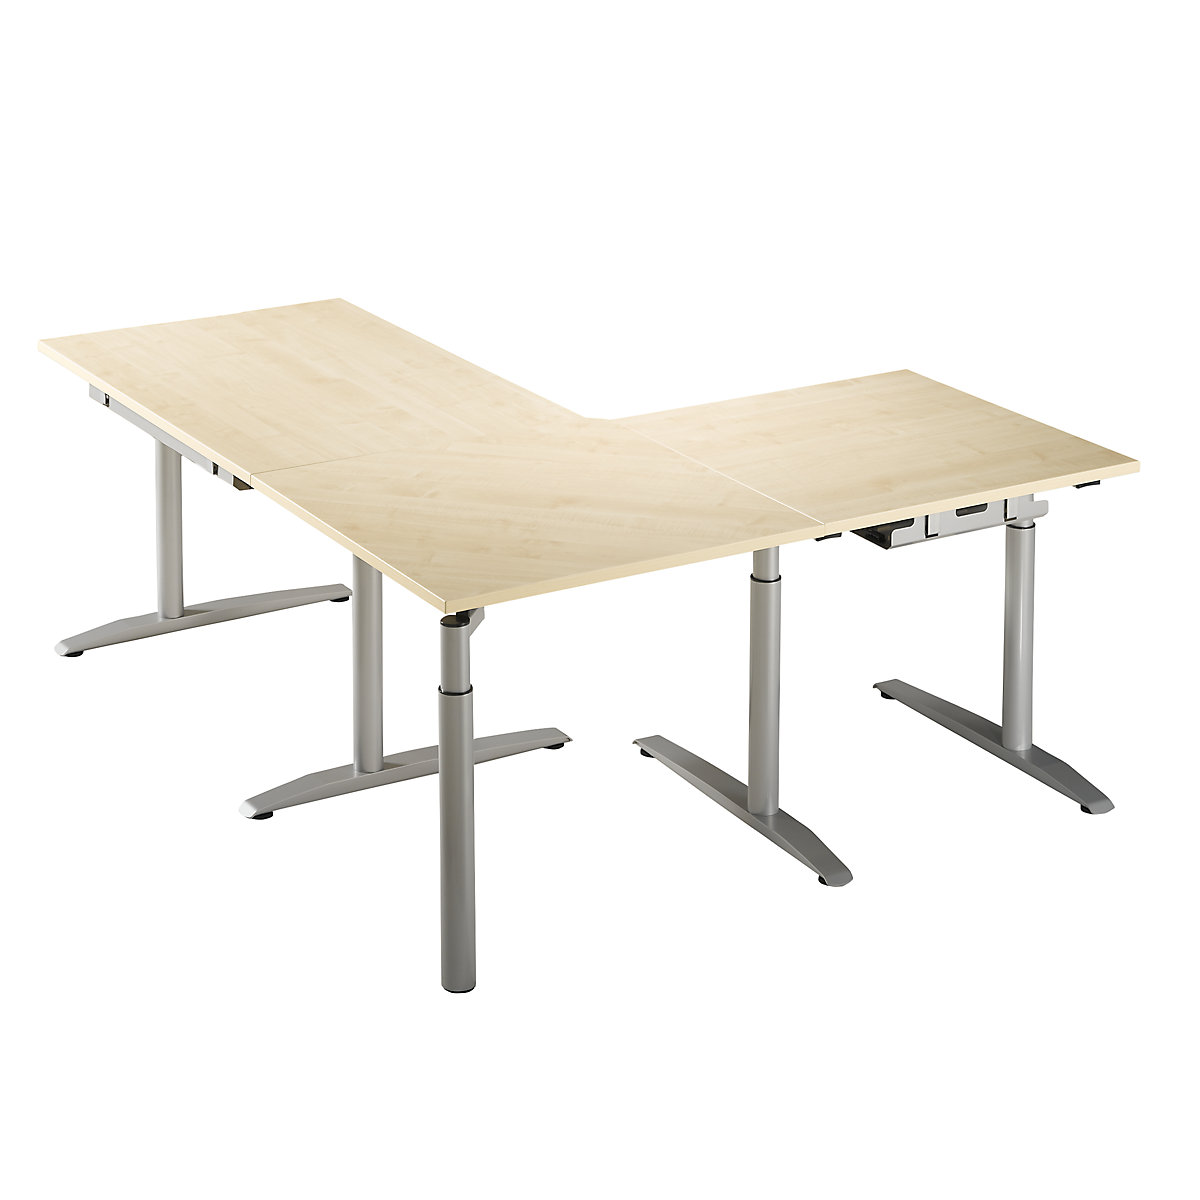 Linking top, height adjustable from 650 - 850 mm HANNA